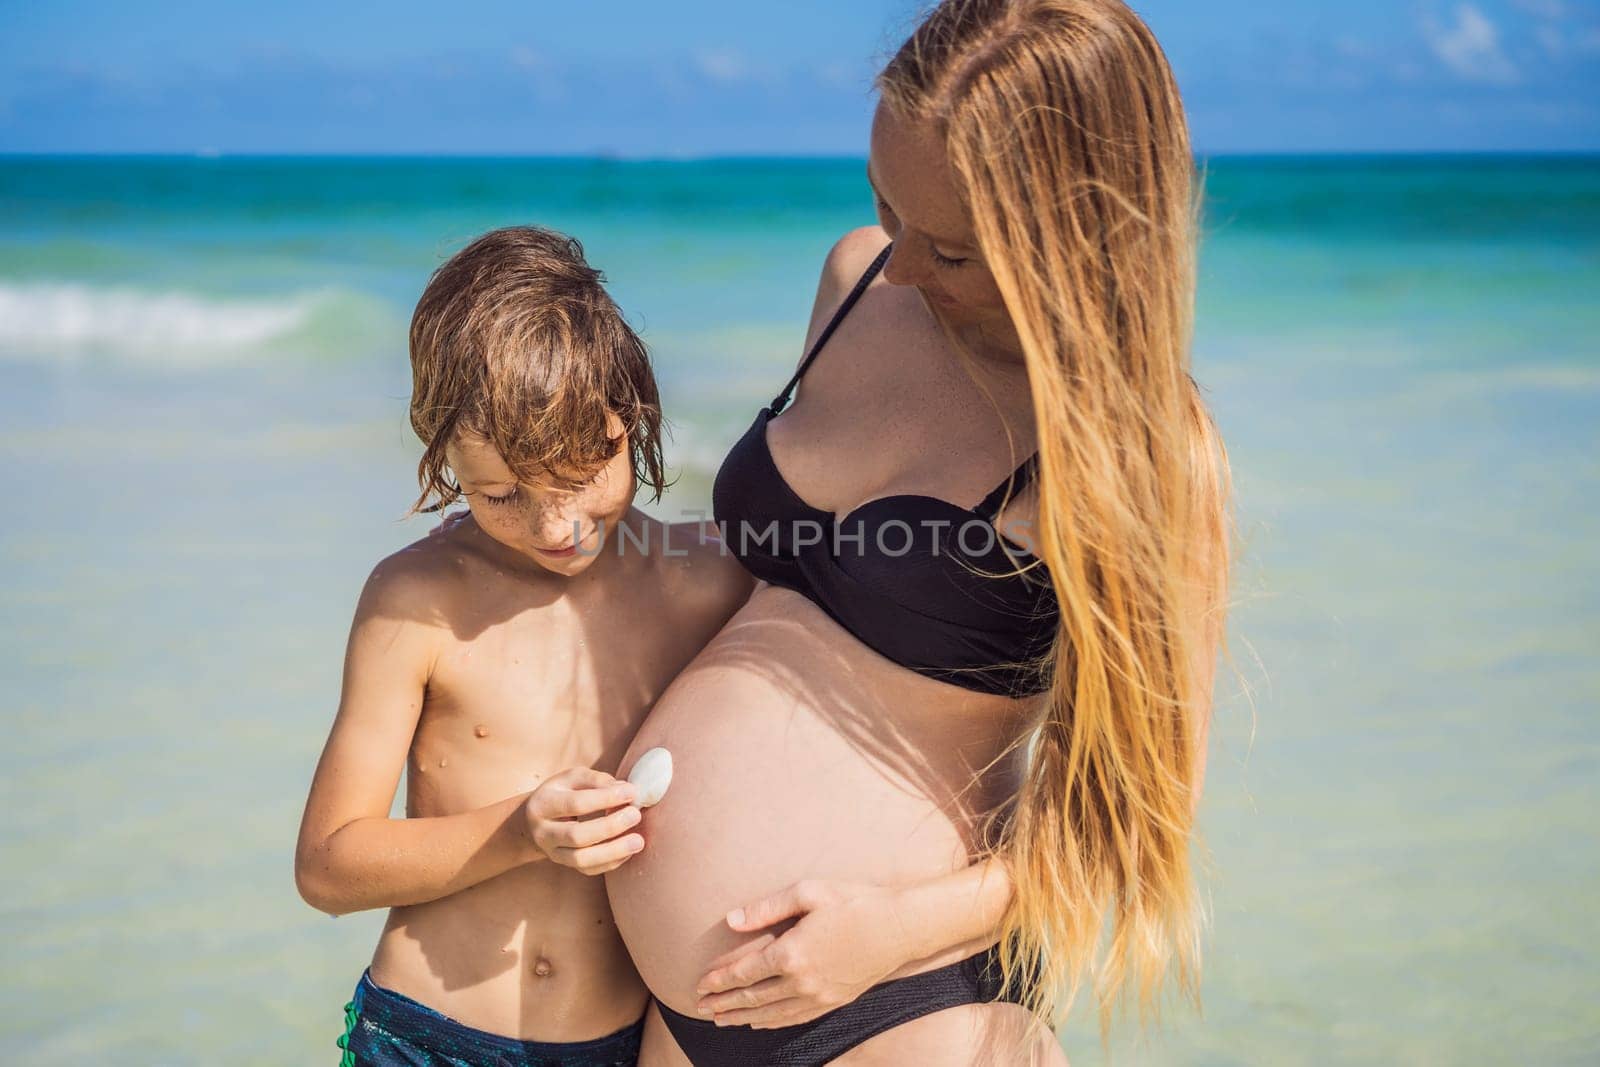 A picturesque moment: a pregnant woman and her son enjoying the turquoise sea, a heartwarming family bond by the tranquil shore by galitskaya